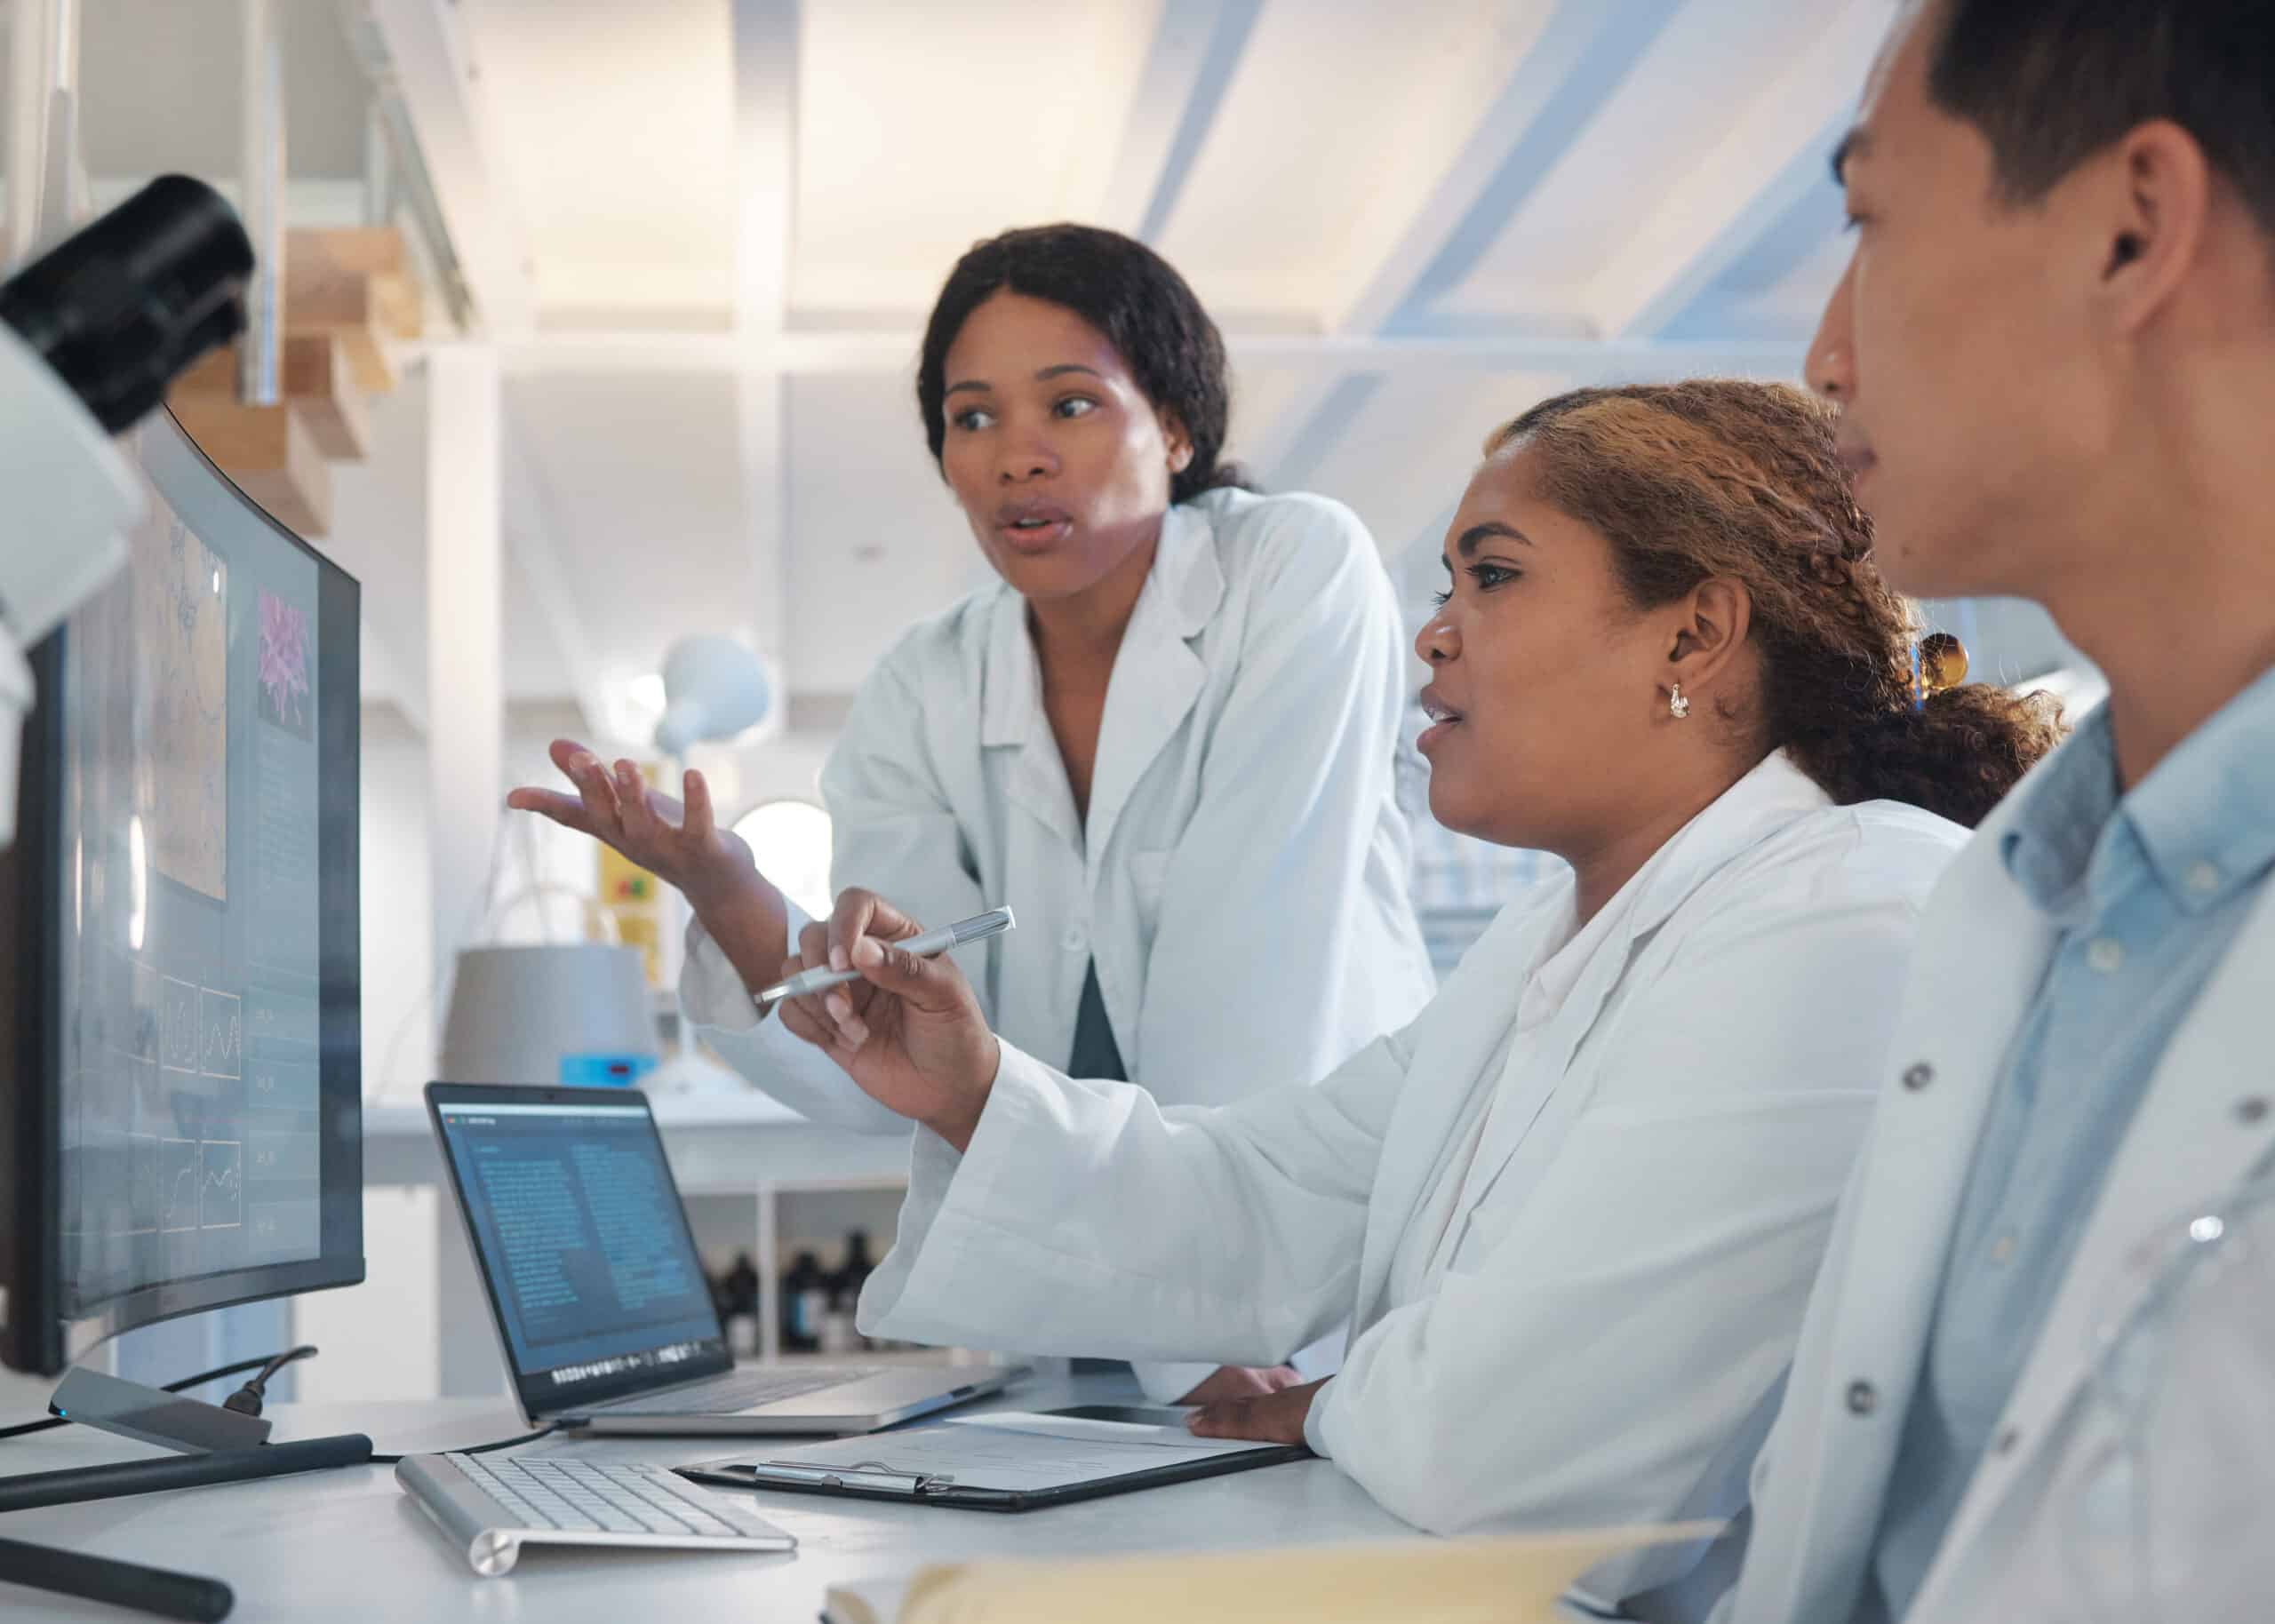 Three life sciences workers in lab coats pointing at a computer screen to discuss a complaint